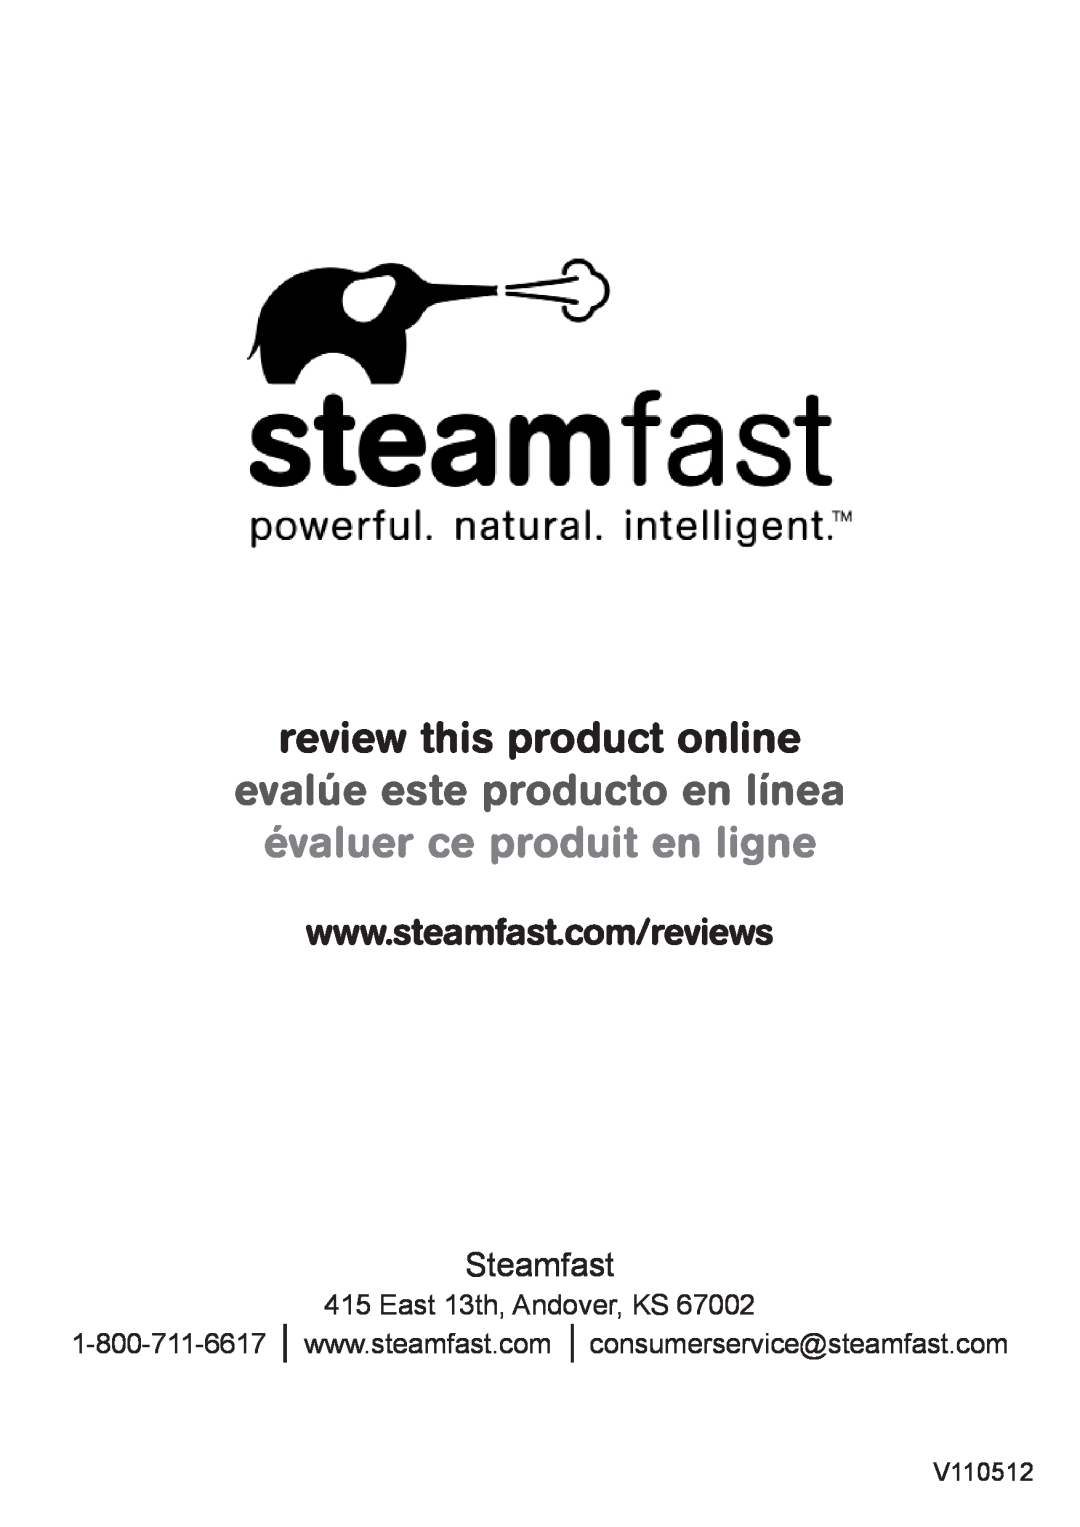 Vornado SF-140 warranty review this product online, Steamfast, East 13th, Andover, KS, V110512 